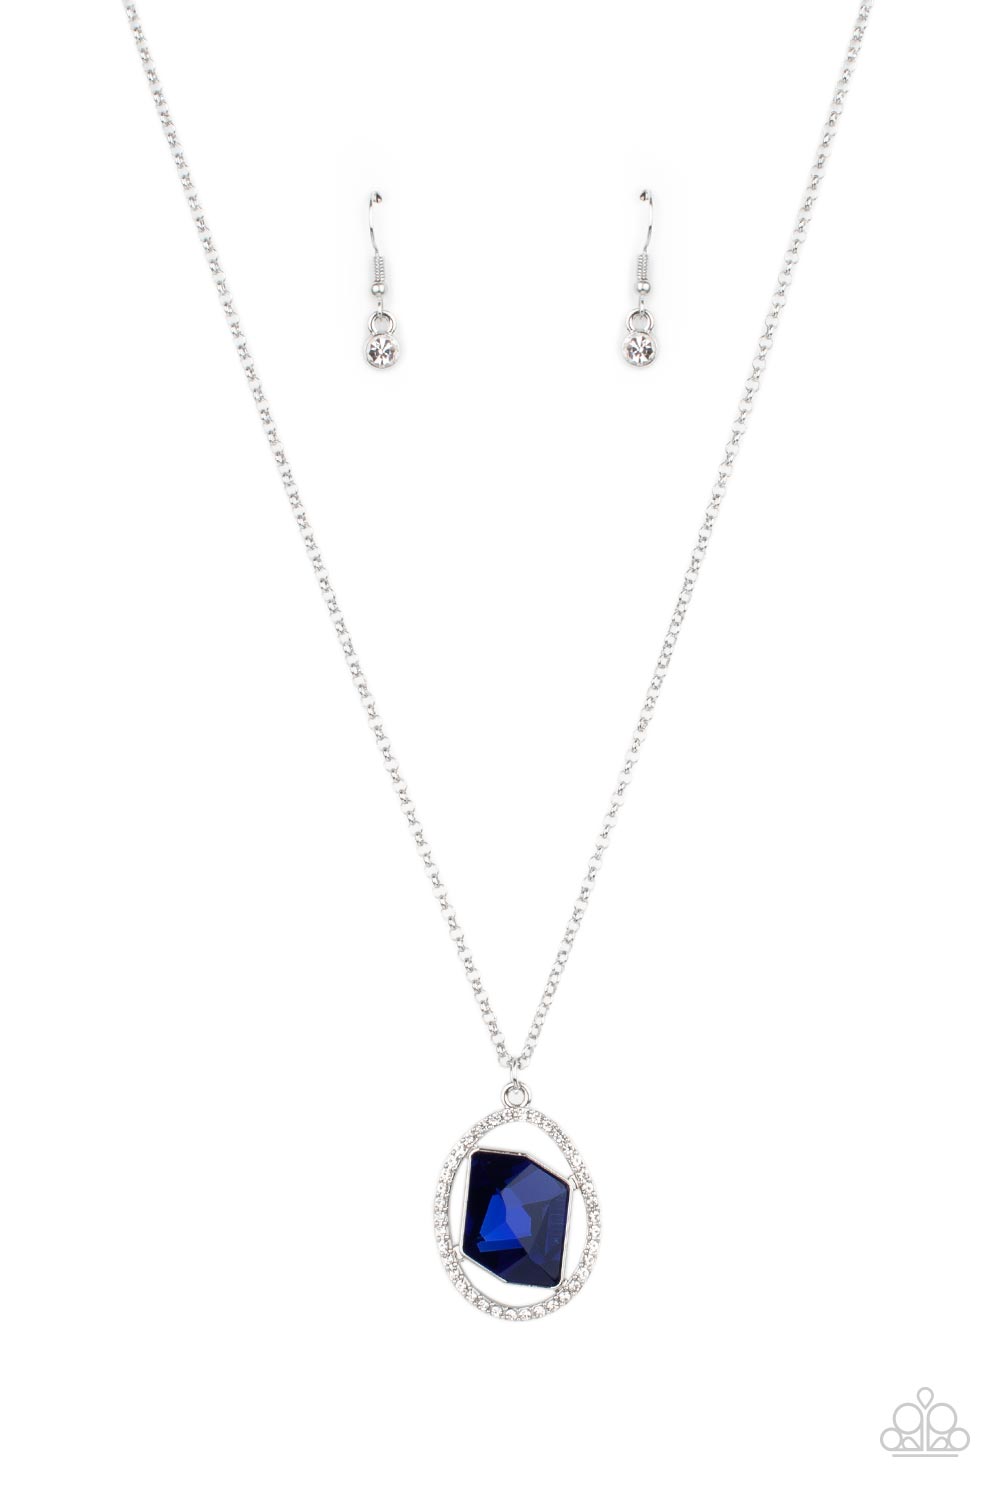 Undiluted Dazzle Blue and White Rhinestone Necklace - Paparazzi Accessories- lightbox - CarasShop.com - $5 Jewelry by Cara Jewels